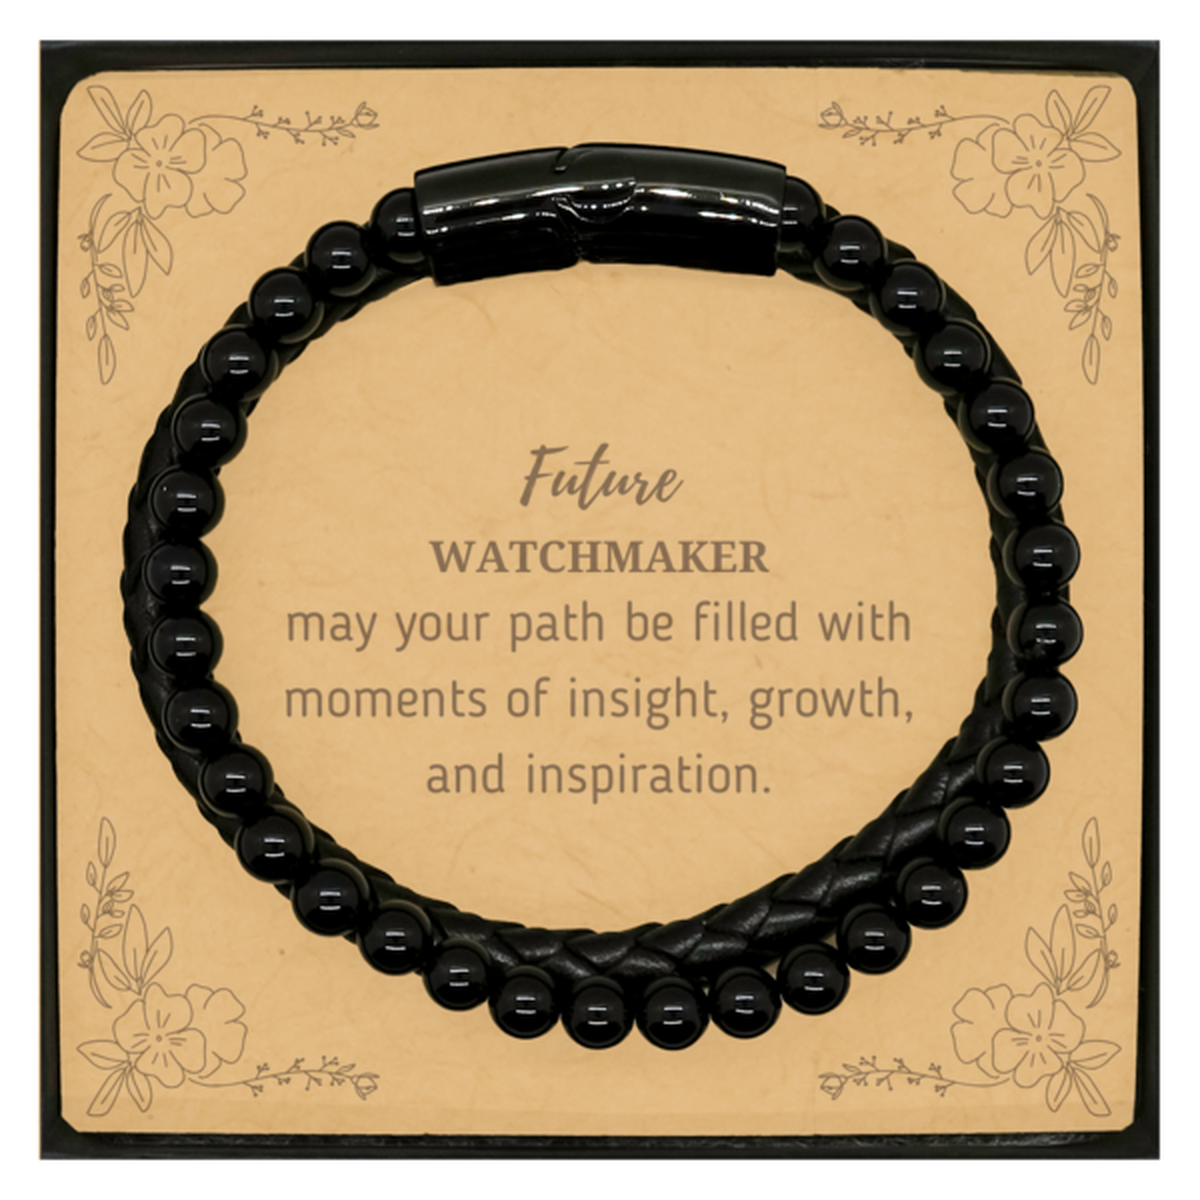 Future Watchmaker Gifts, May your path be filled with moments of insight, Graduation Gifts for New Watchmaker, Christmas Unique Stone Leather Bracelets For Men, Women, Friends